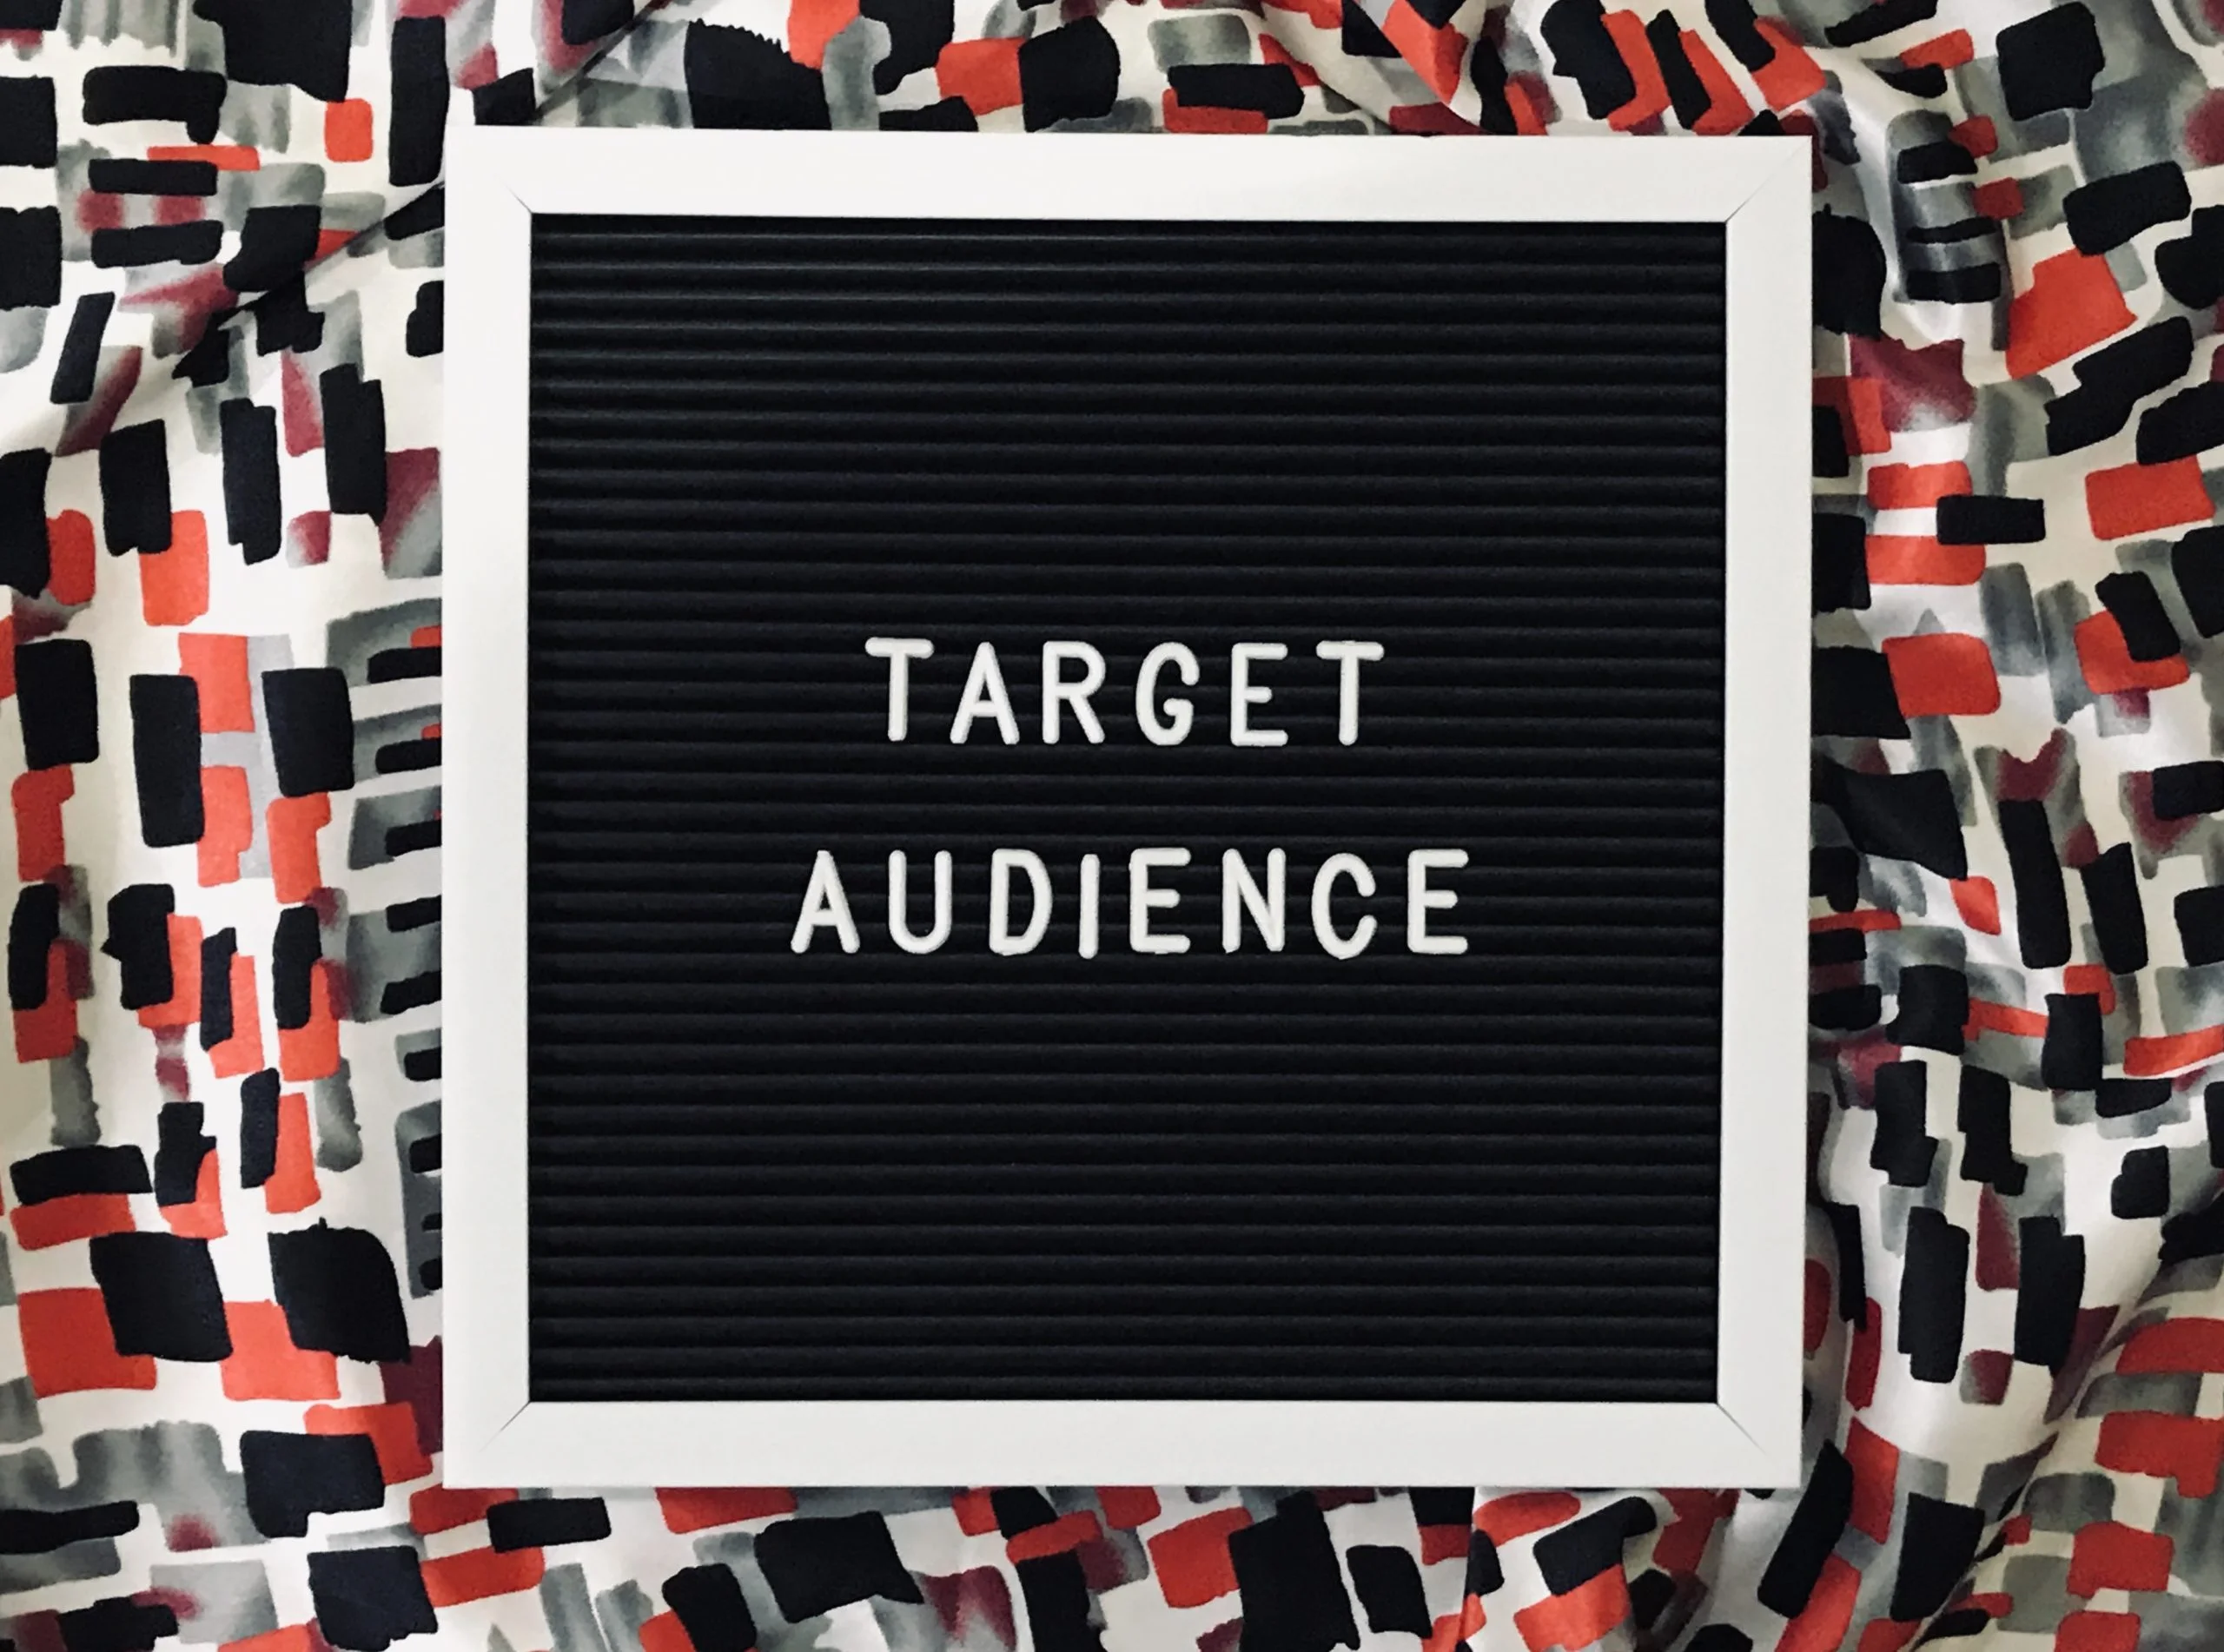 This image shows the words target audience against an abstract background 